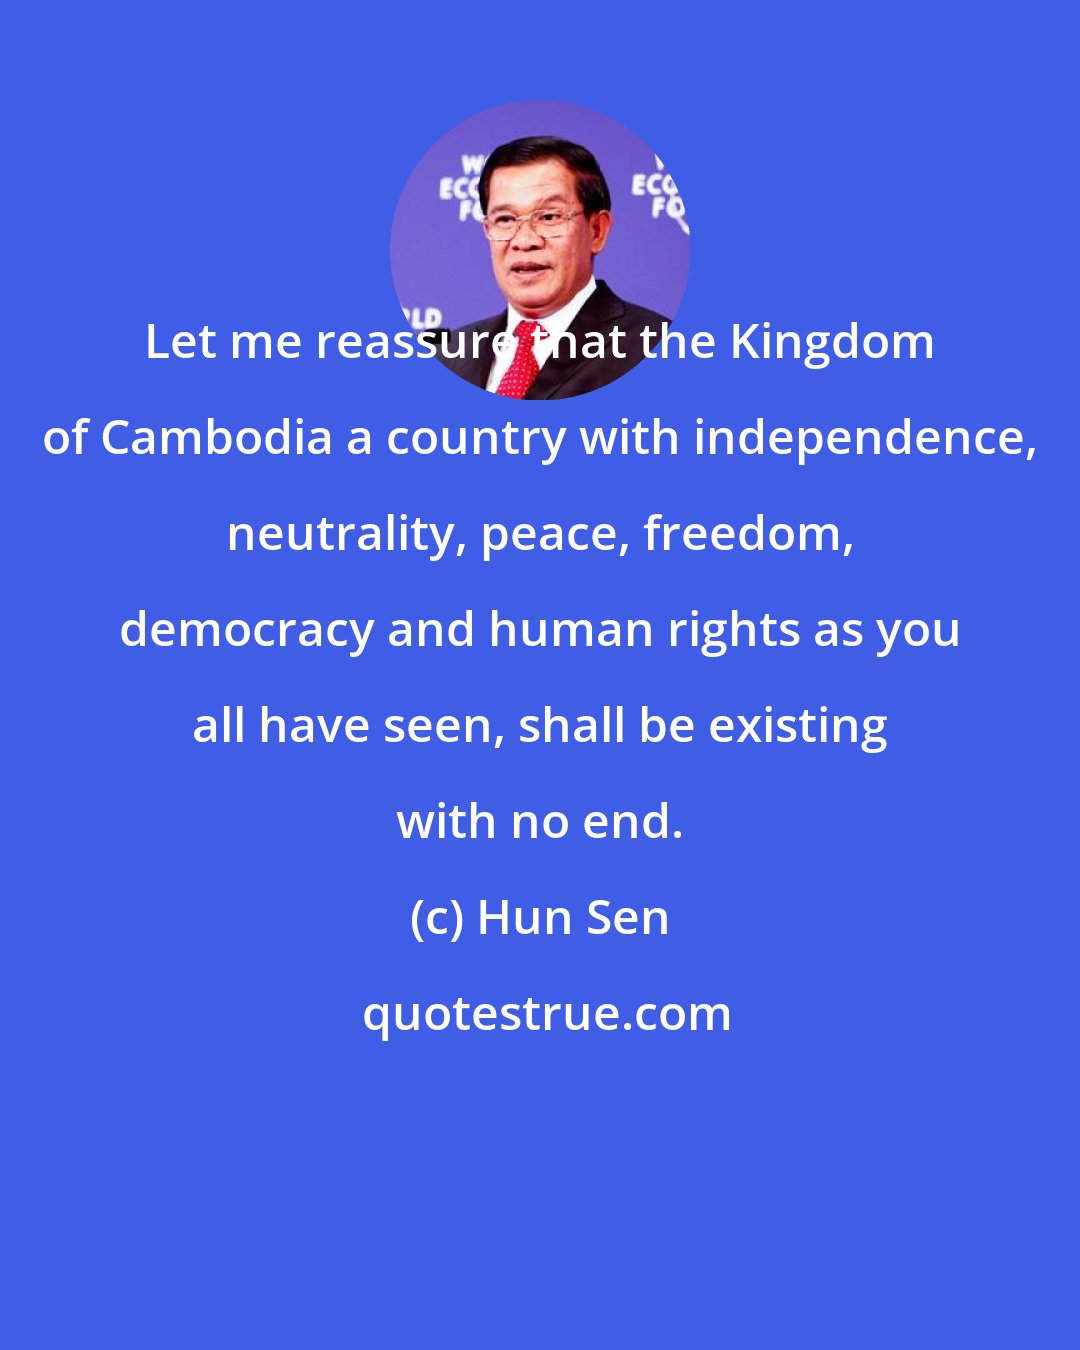 Hun Sen: Let me reassure that the Kingdom of Cambodia a country with independence, neutrality, peace, freedom, democracy and human rights as you all have seen, shall be existing with no end.